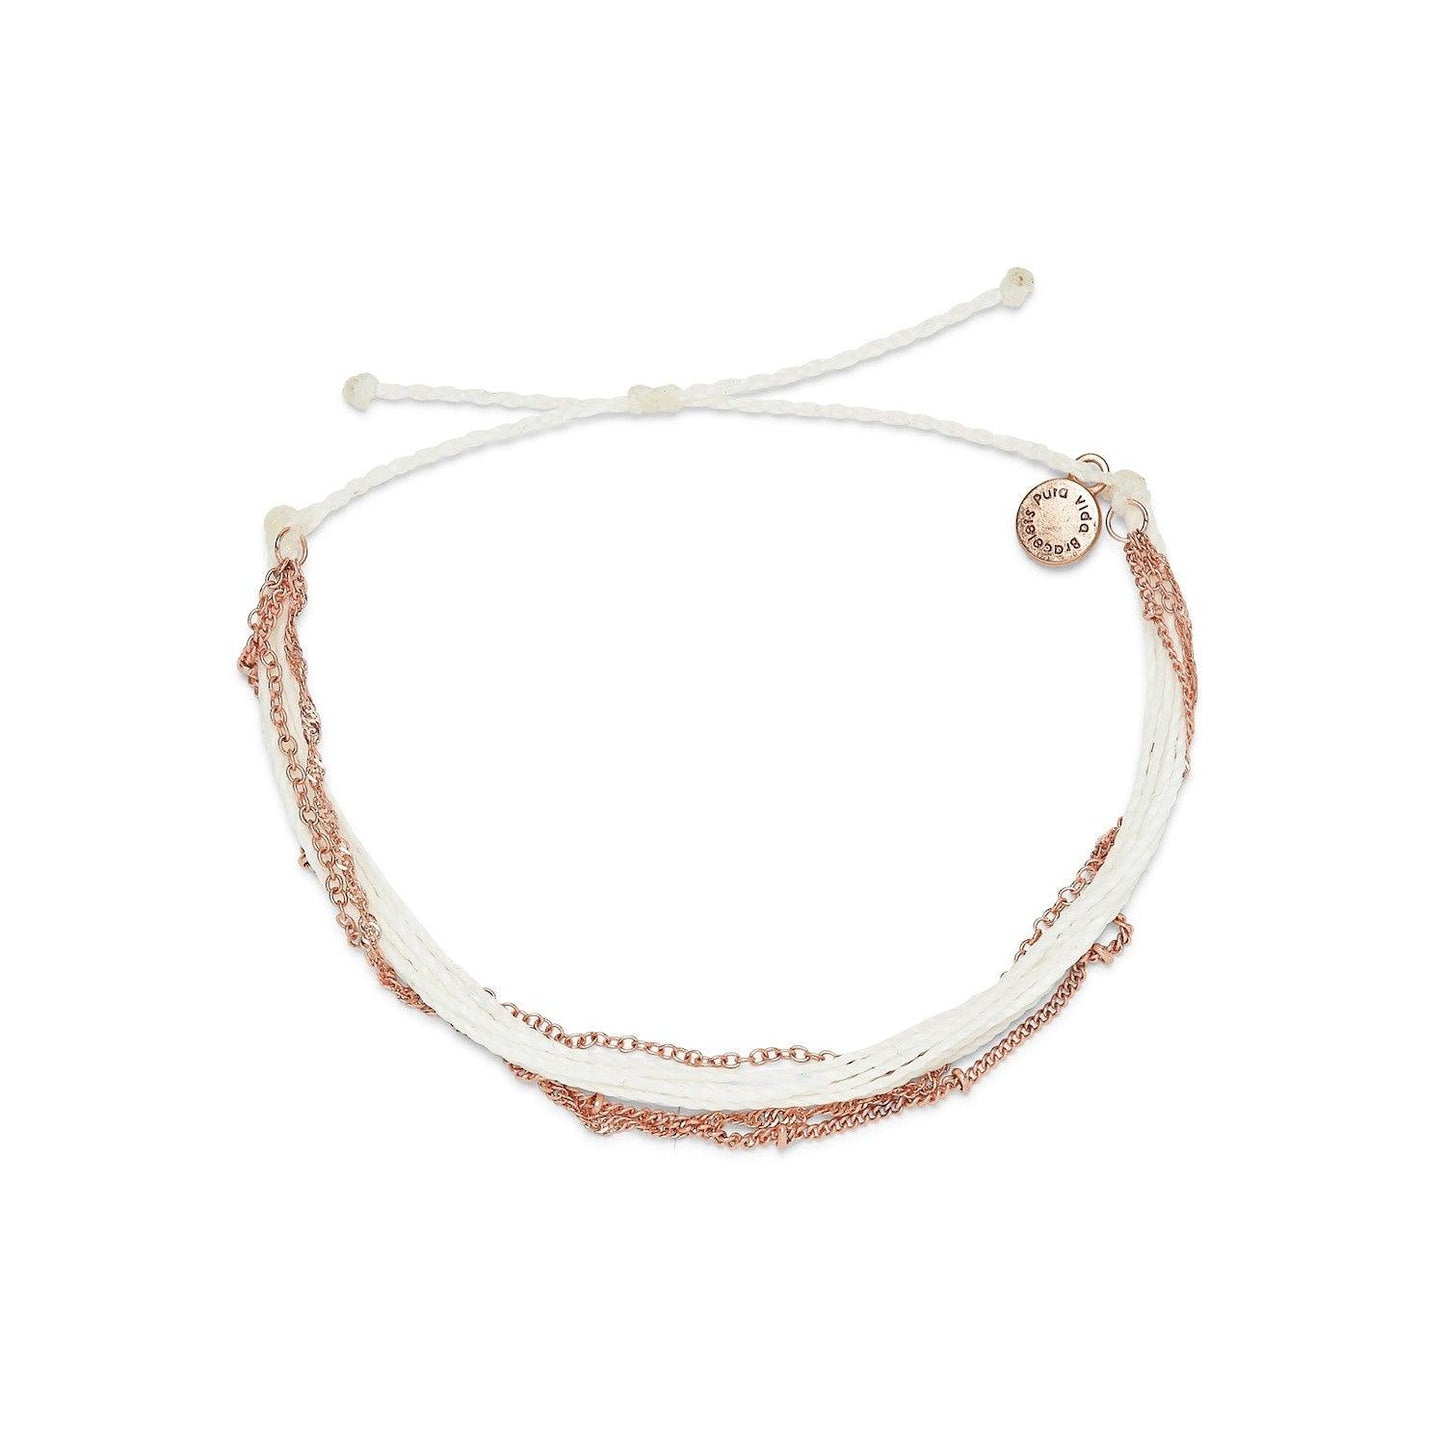 Puravida Anklet Collection - The Salty Mare